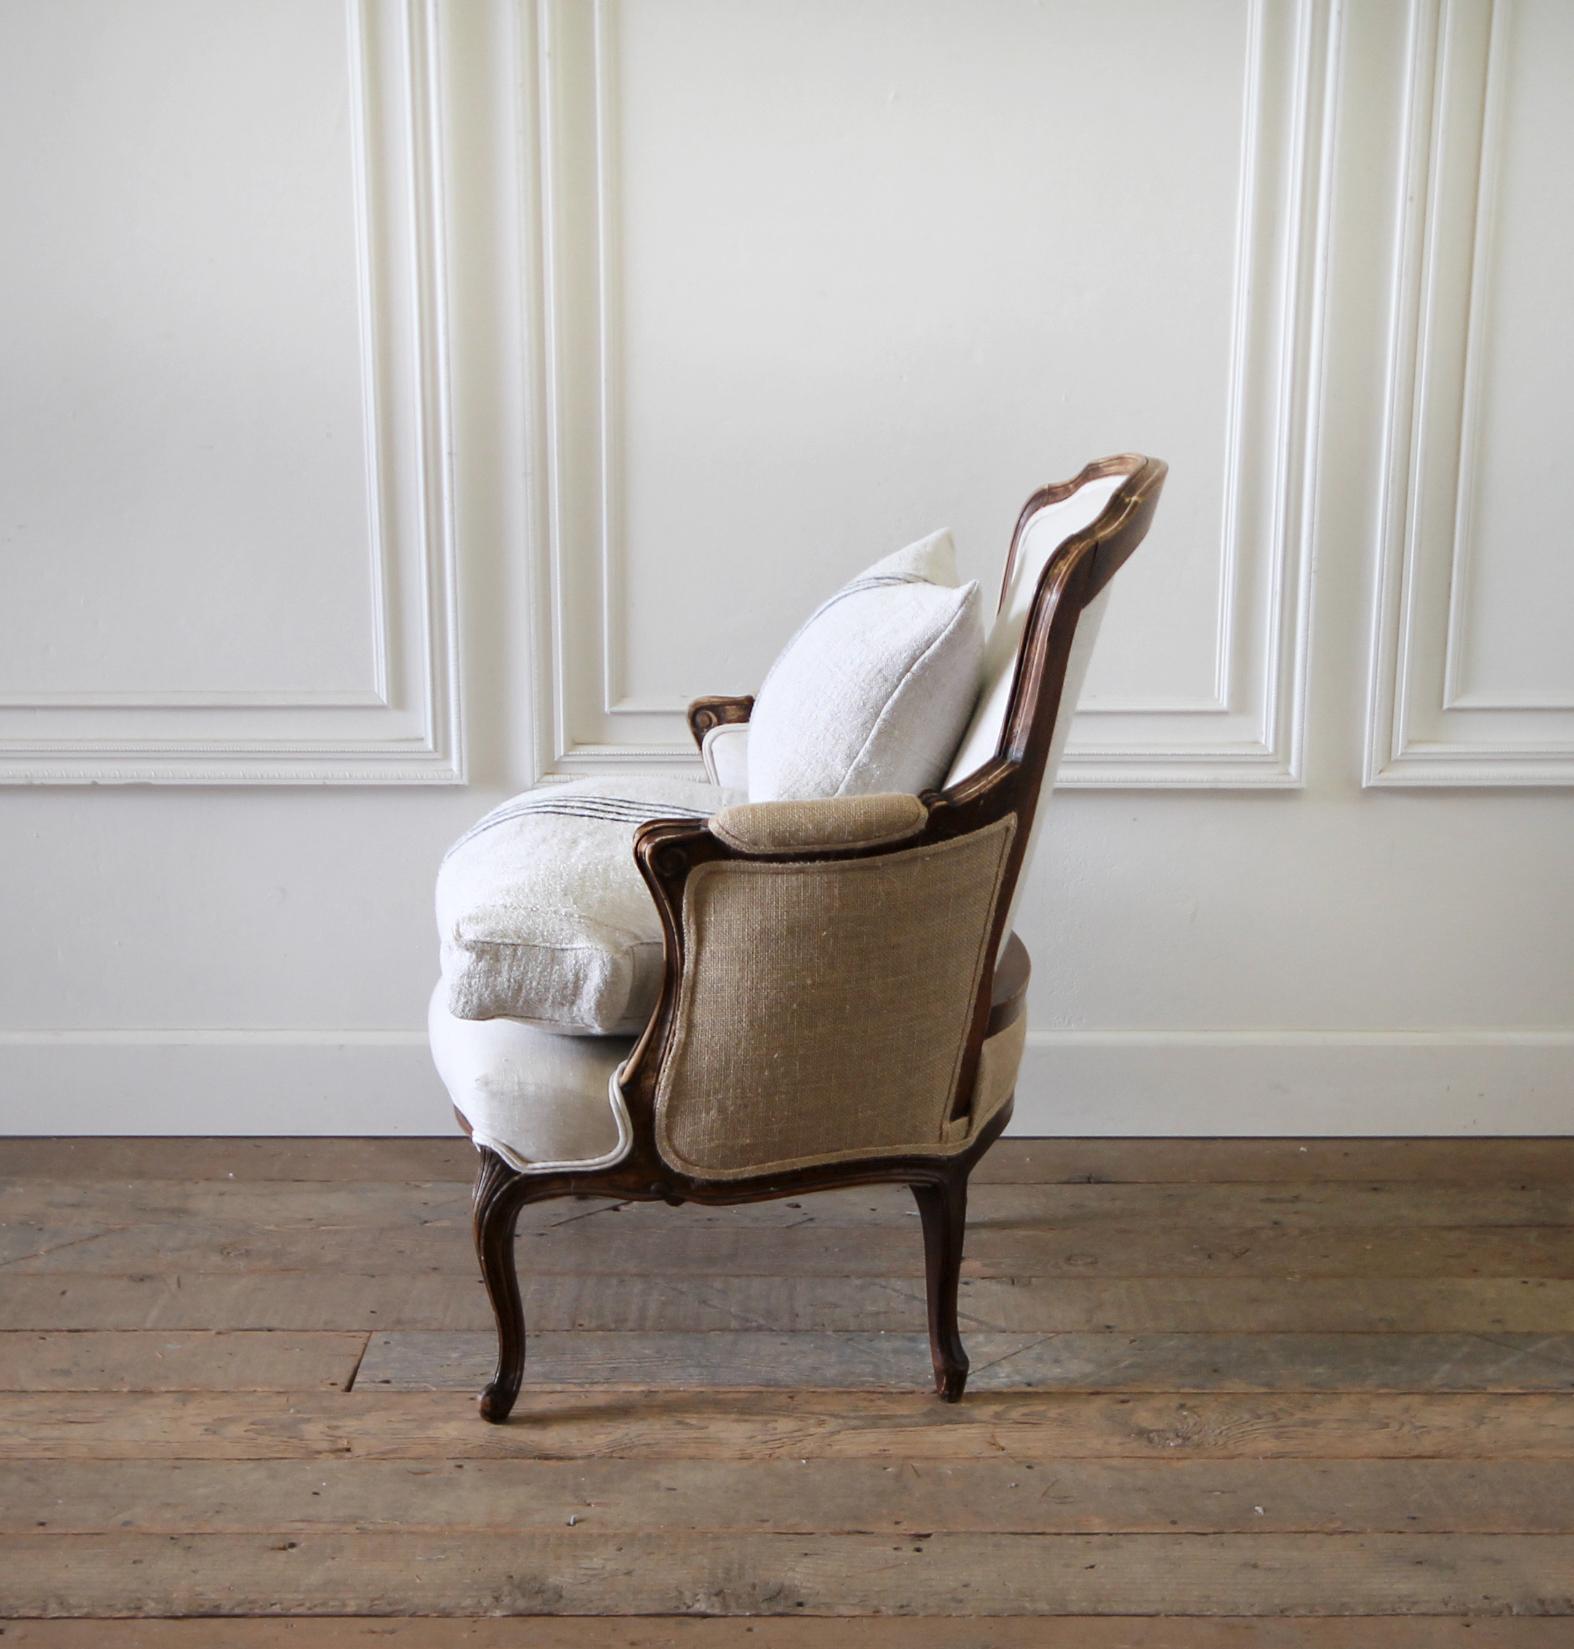 European Early 20th Century French Country Bergere Chair with Linen Grainsack Upholstery